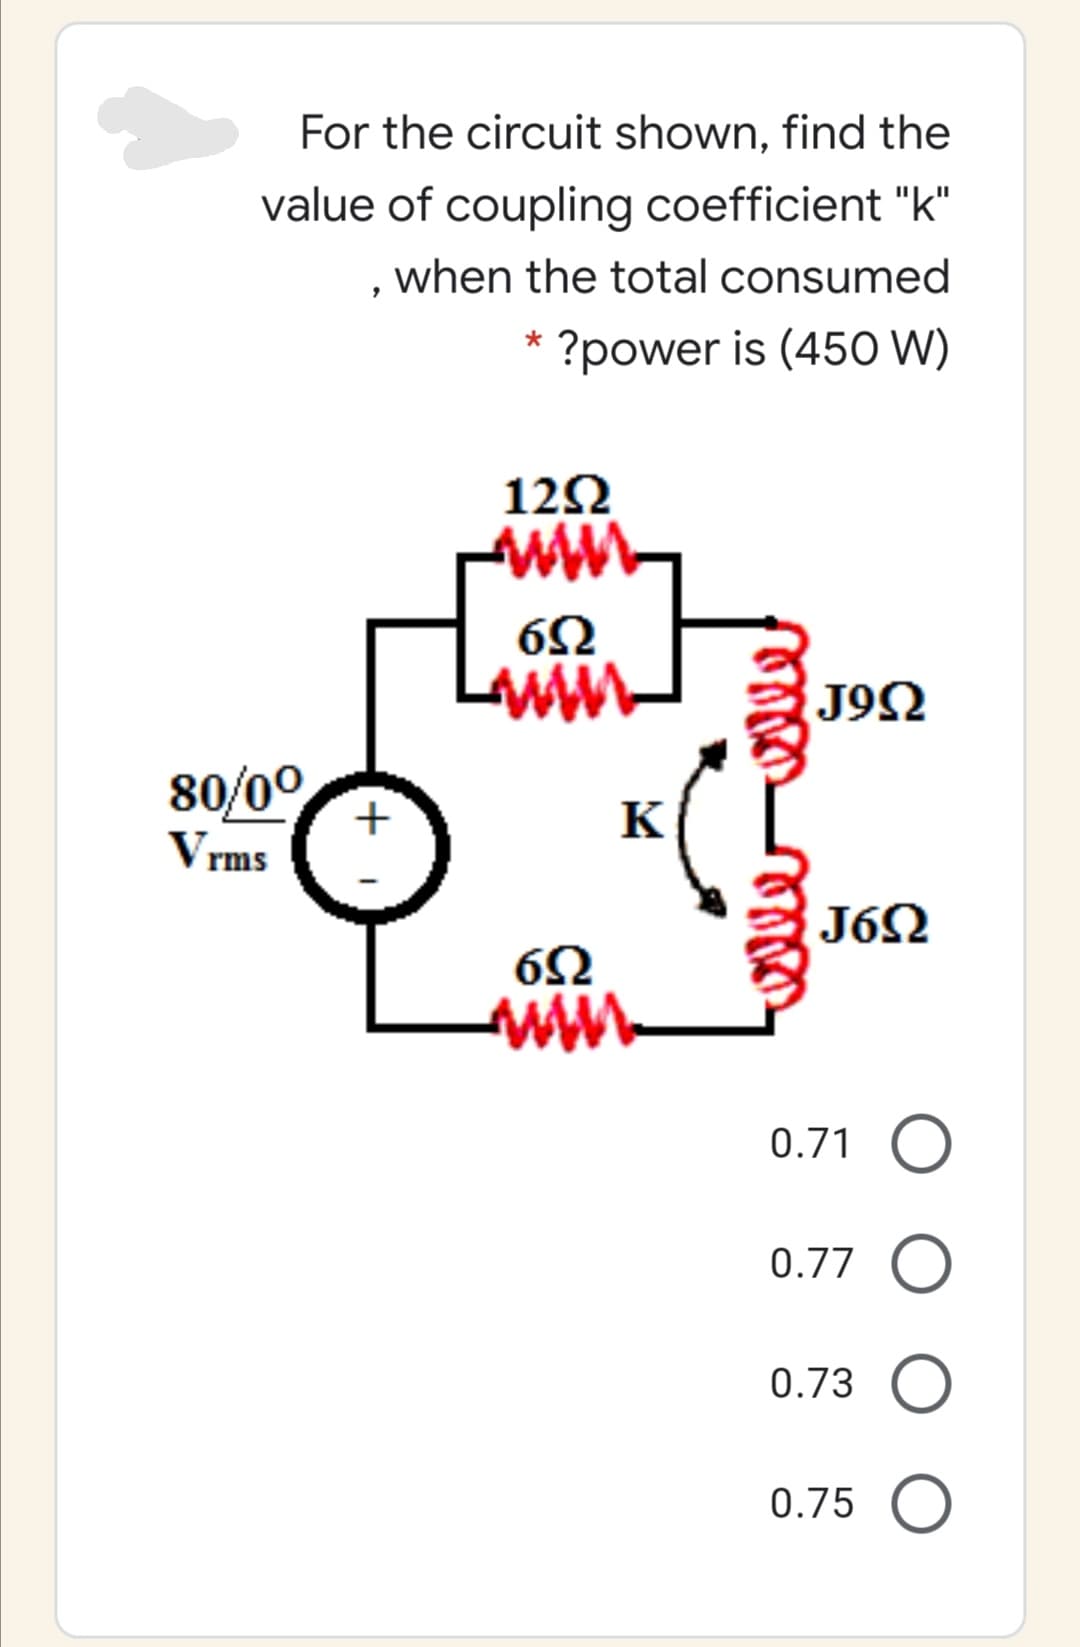 For the circuit shown, find the
value of coupling coefficient "k"
when the total consumed
?power is (450 W)
